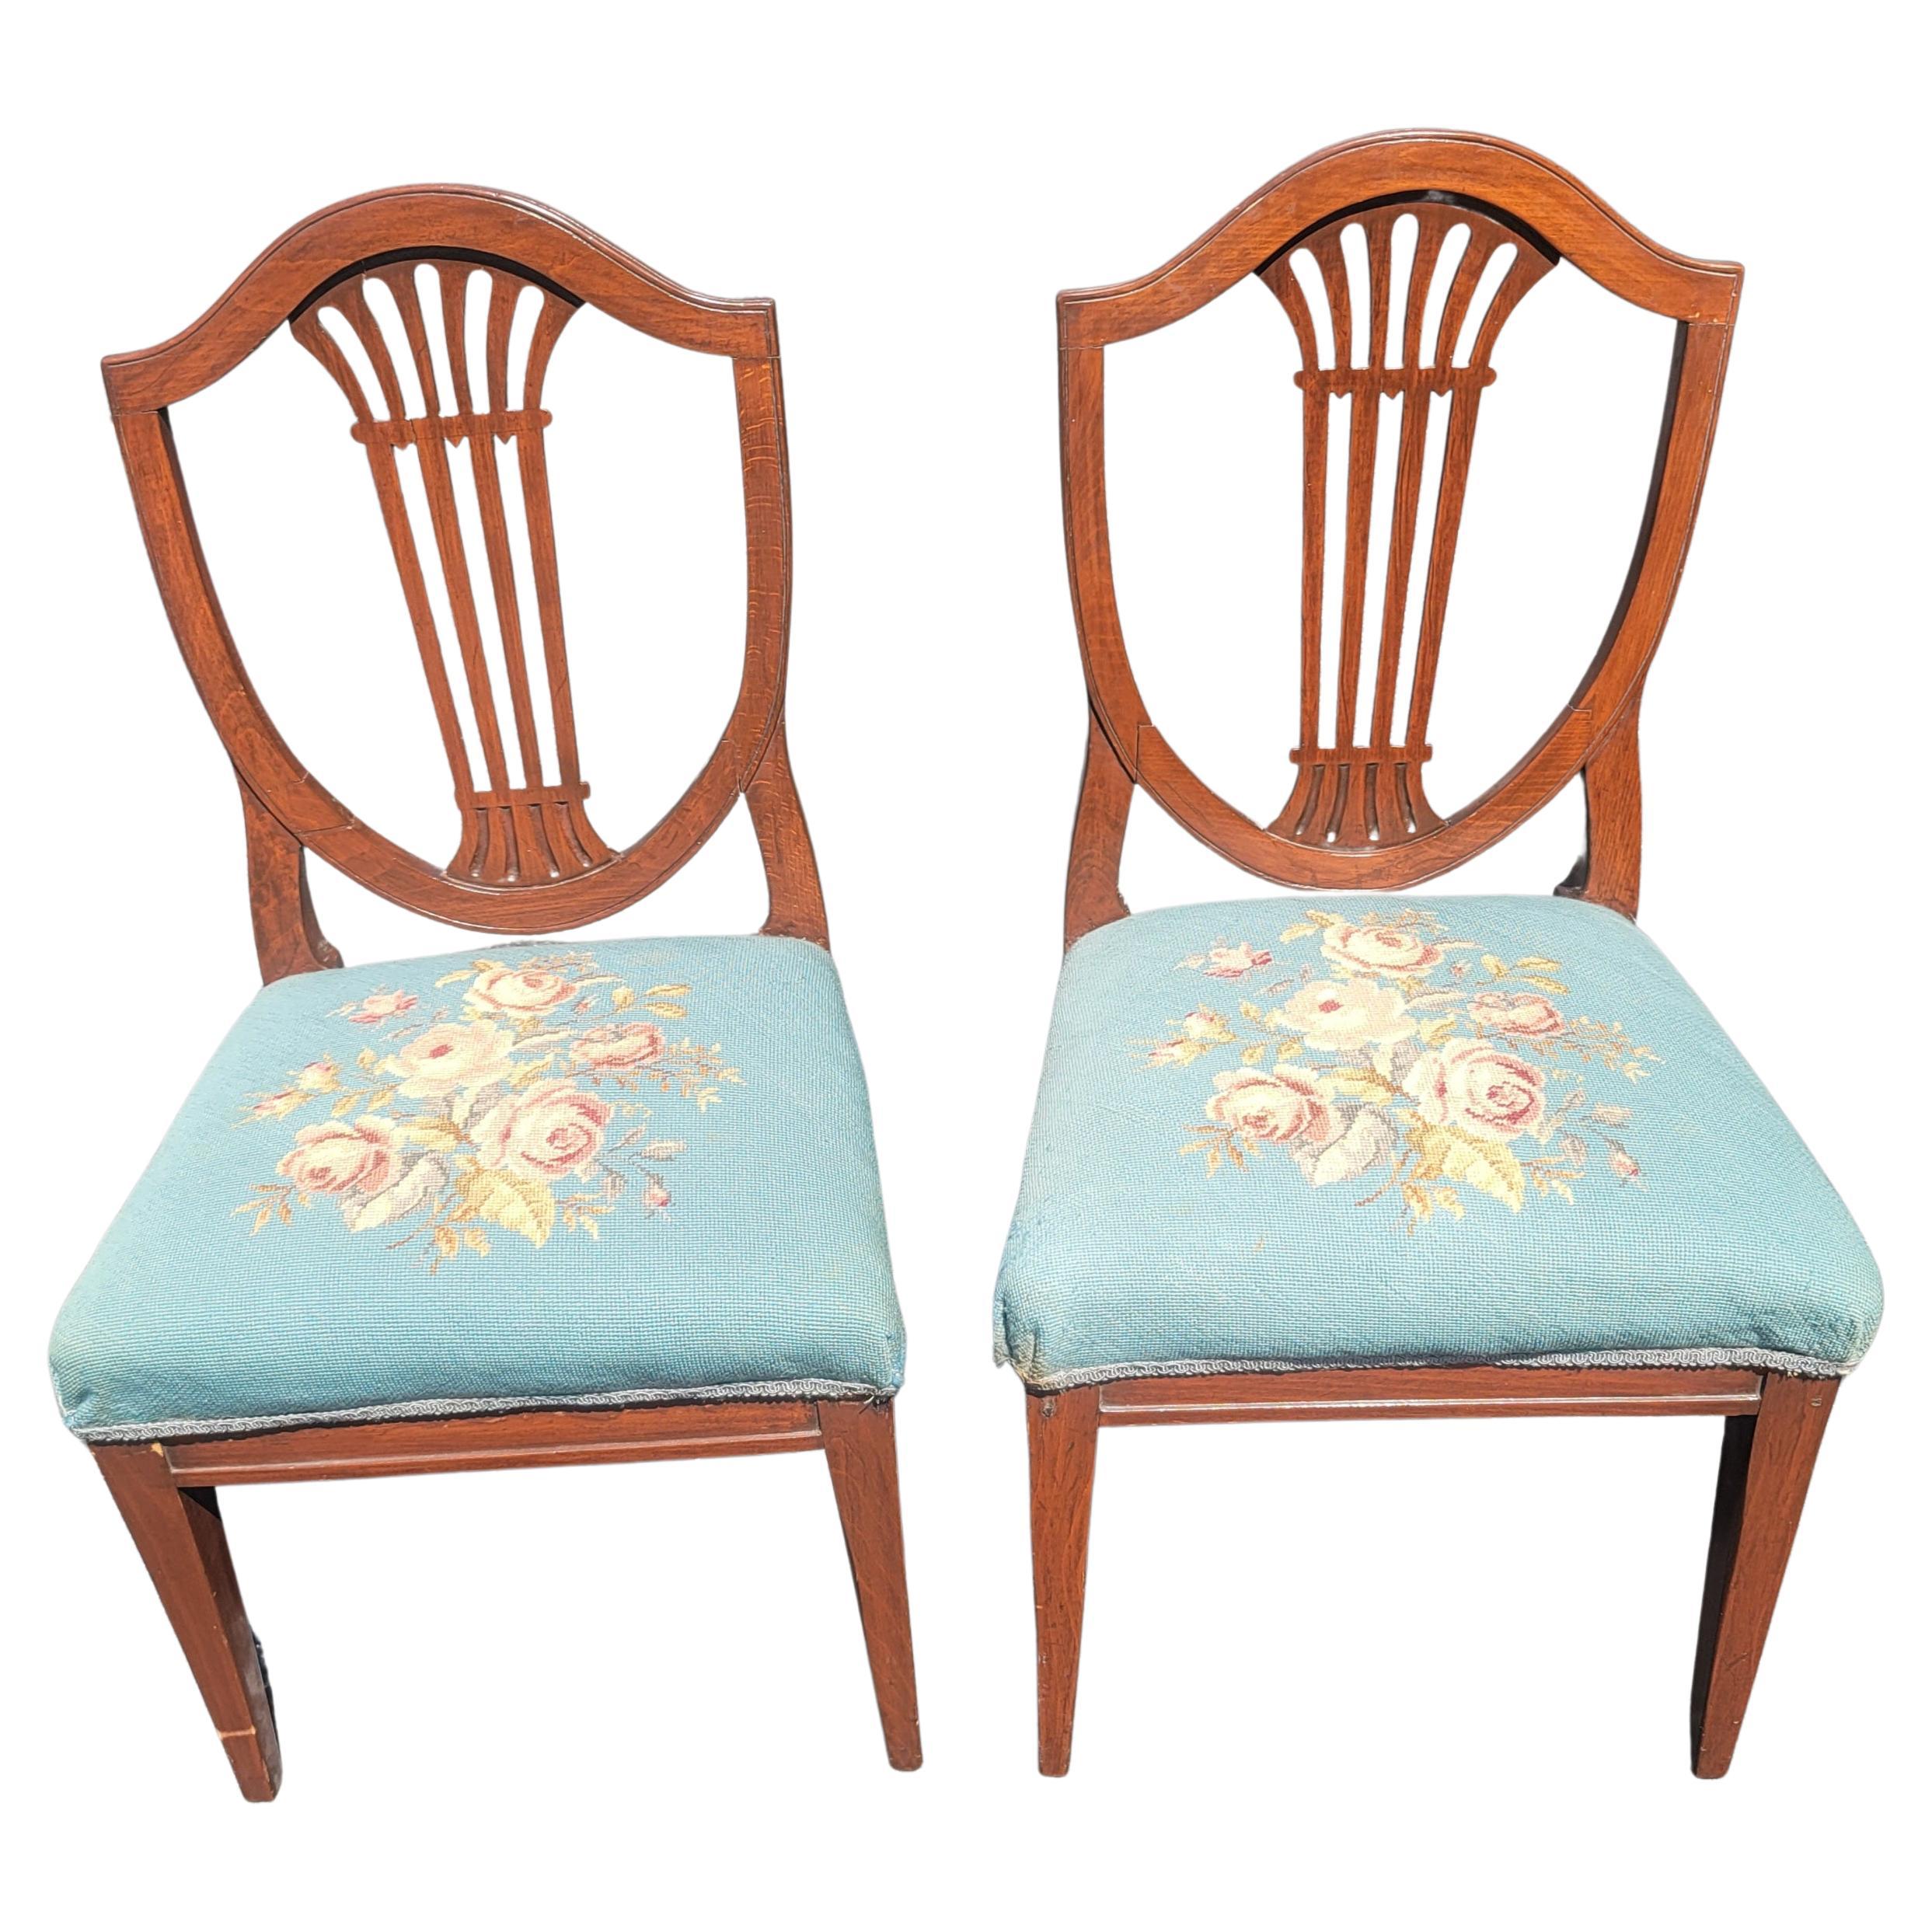 A 1940s pair of Mahogany Shield Back Upholstered Needle Point seat Chairs for your consideration. 
Measure 19.5